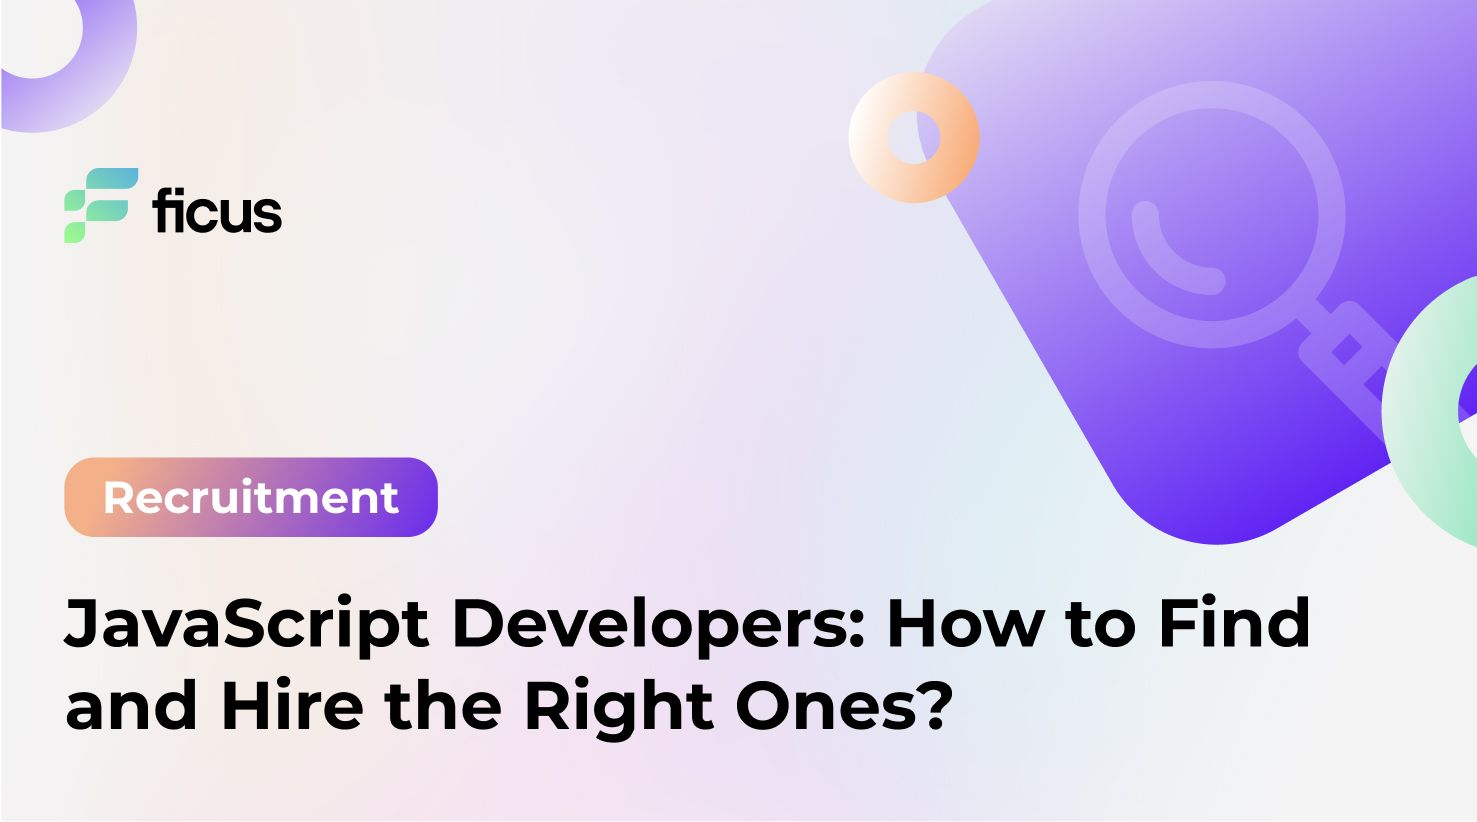 JavaScript Developers: How to Find and Hire the Right Ones?